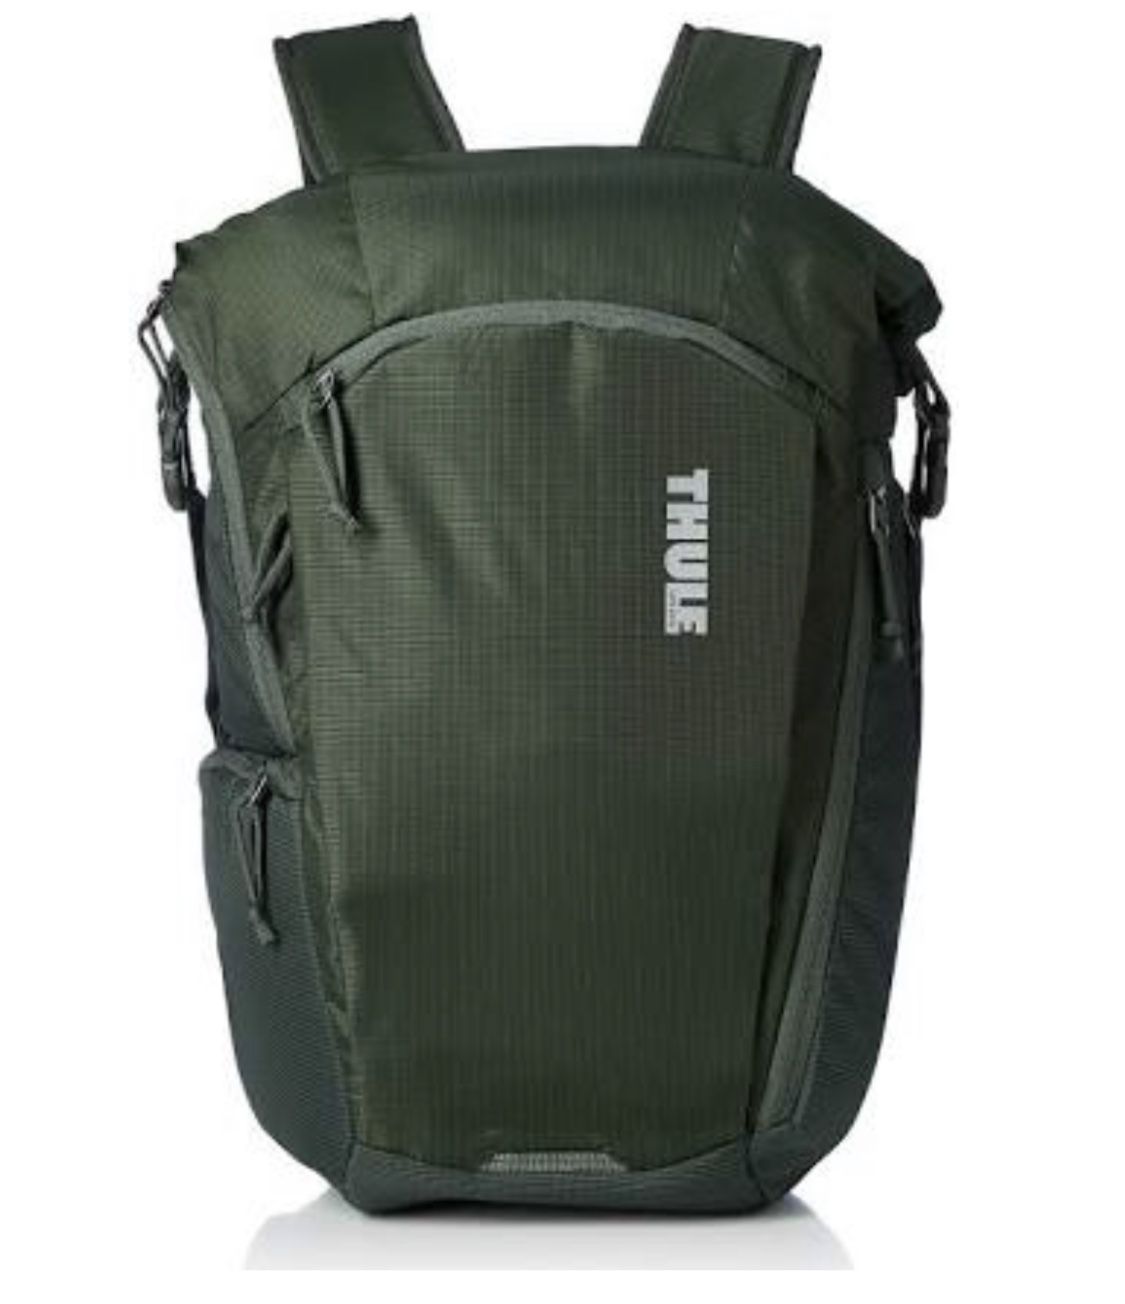 ***LOST*** Green Backpack With Camera Equipment Inside